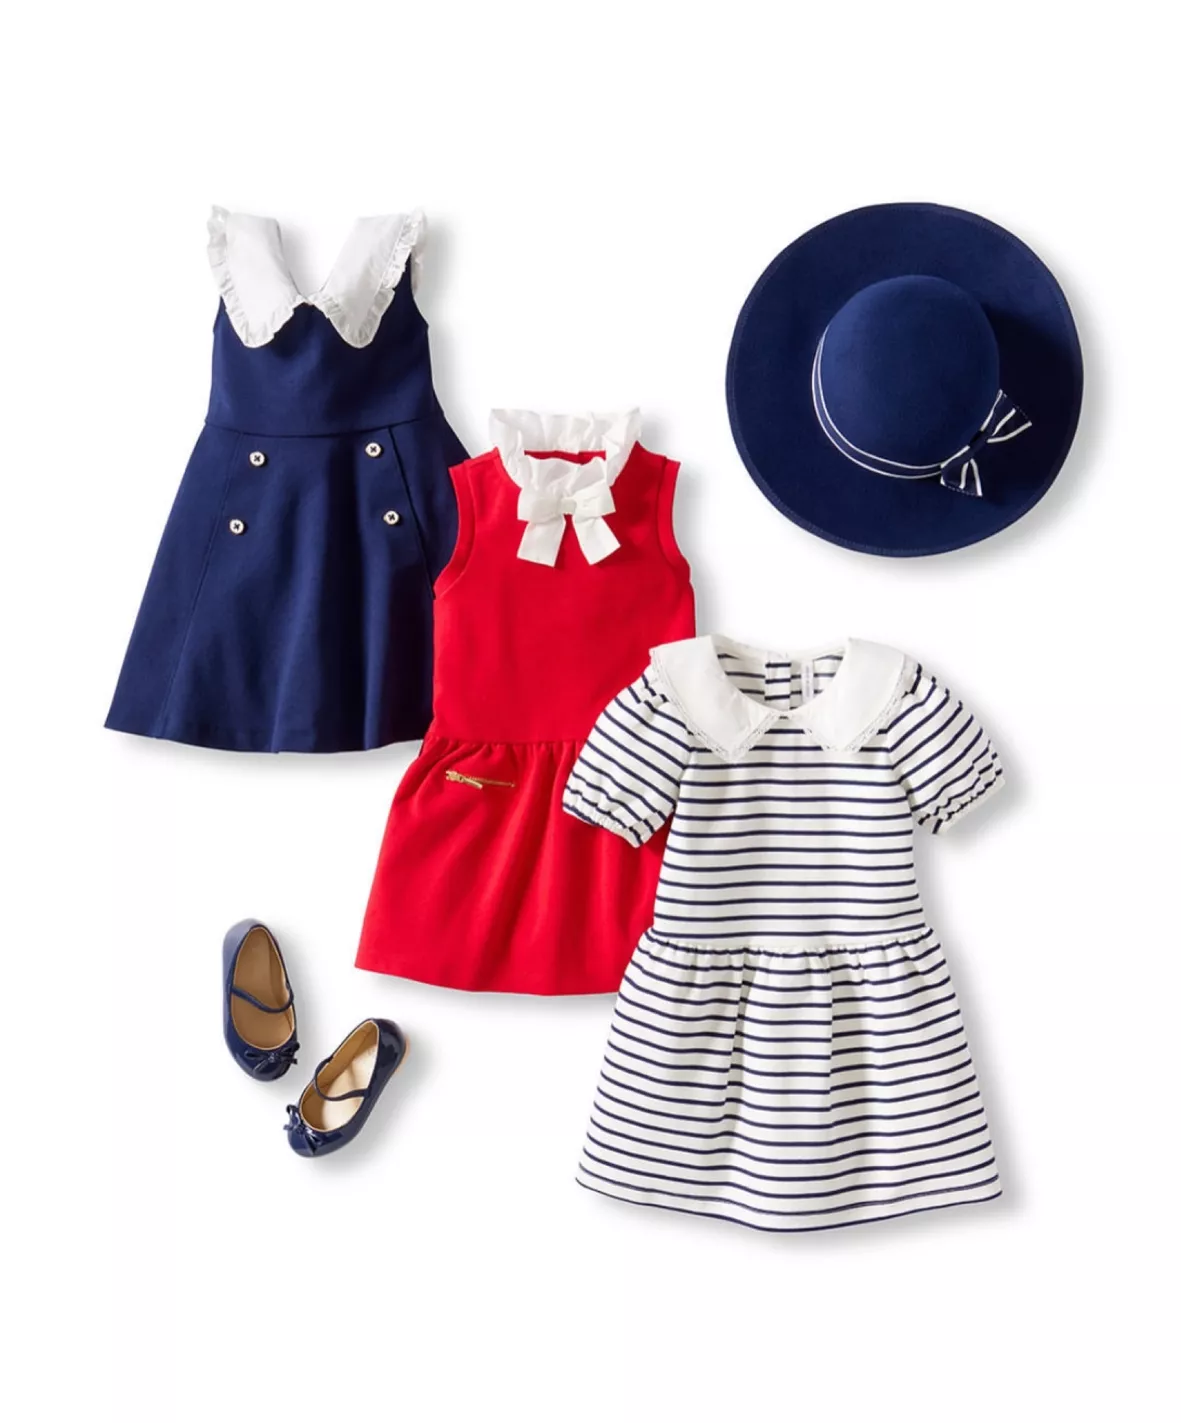 Ready-to-wear in For Baby for New